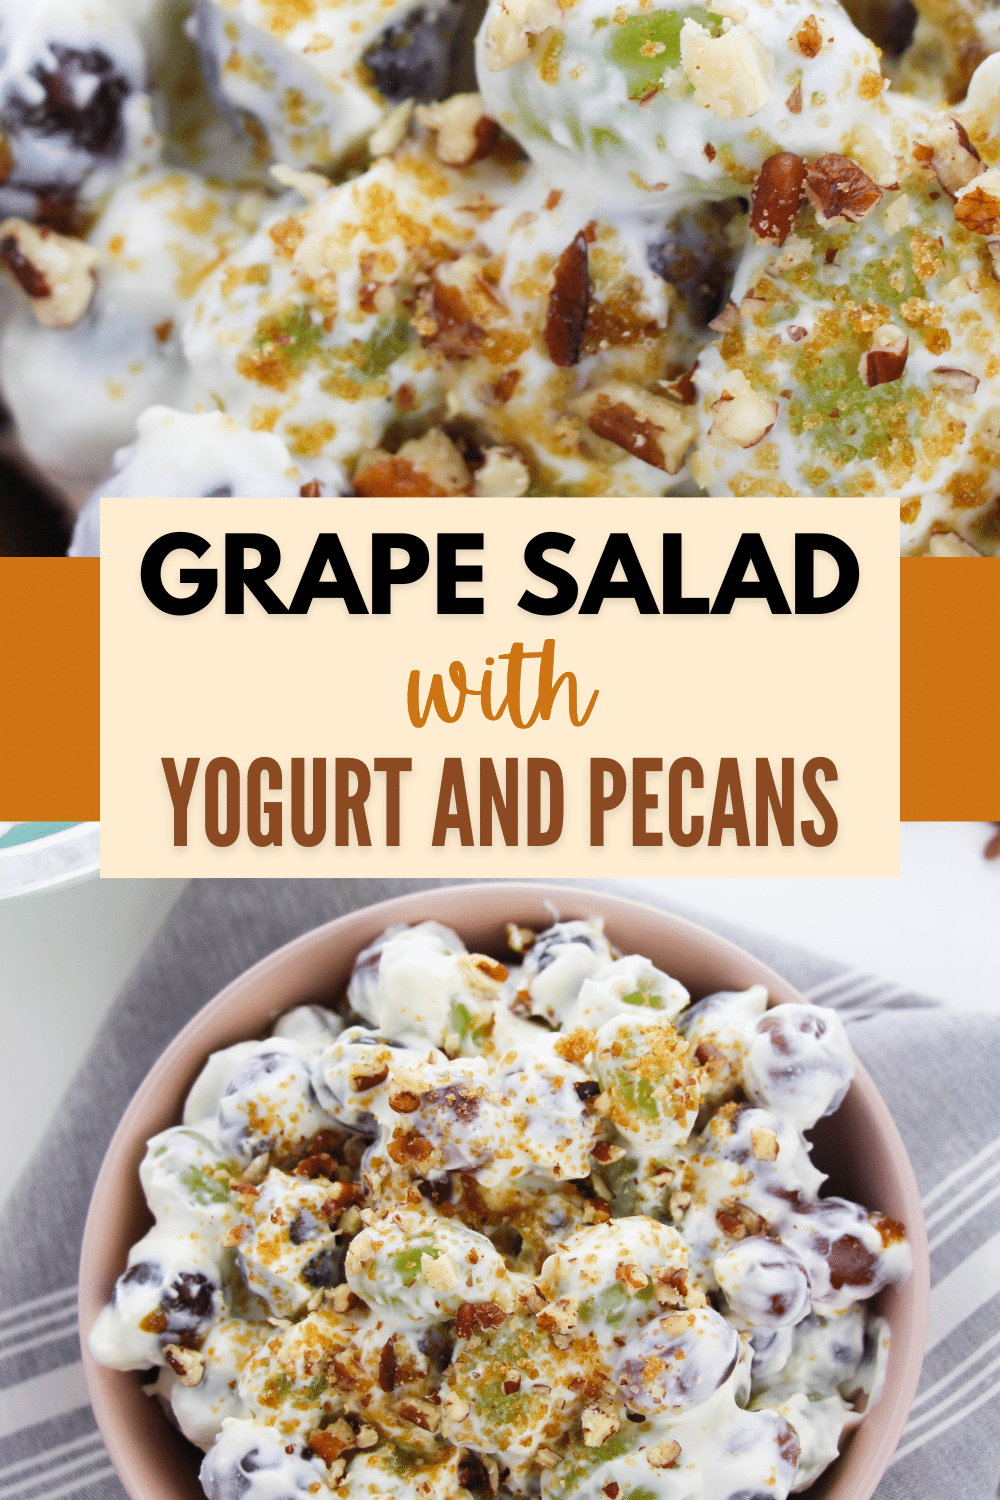 This Grape Salad with Yogurt and Pecans is a delicious, light and healthy dish that is perfect for a summer day, or any day of the year. #grapesaladwithyogurt #grapesaladrecipe #creamygrapesalad #easygrapesaladrecipe #grapesalad via @wondermomwannab